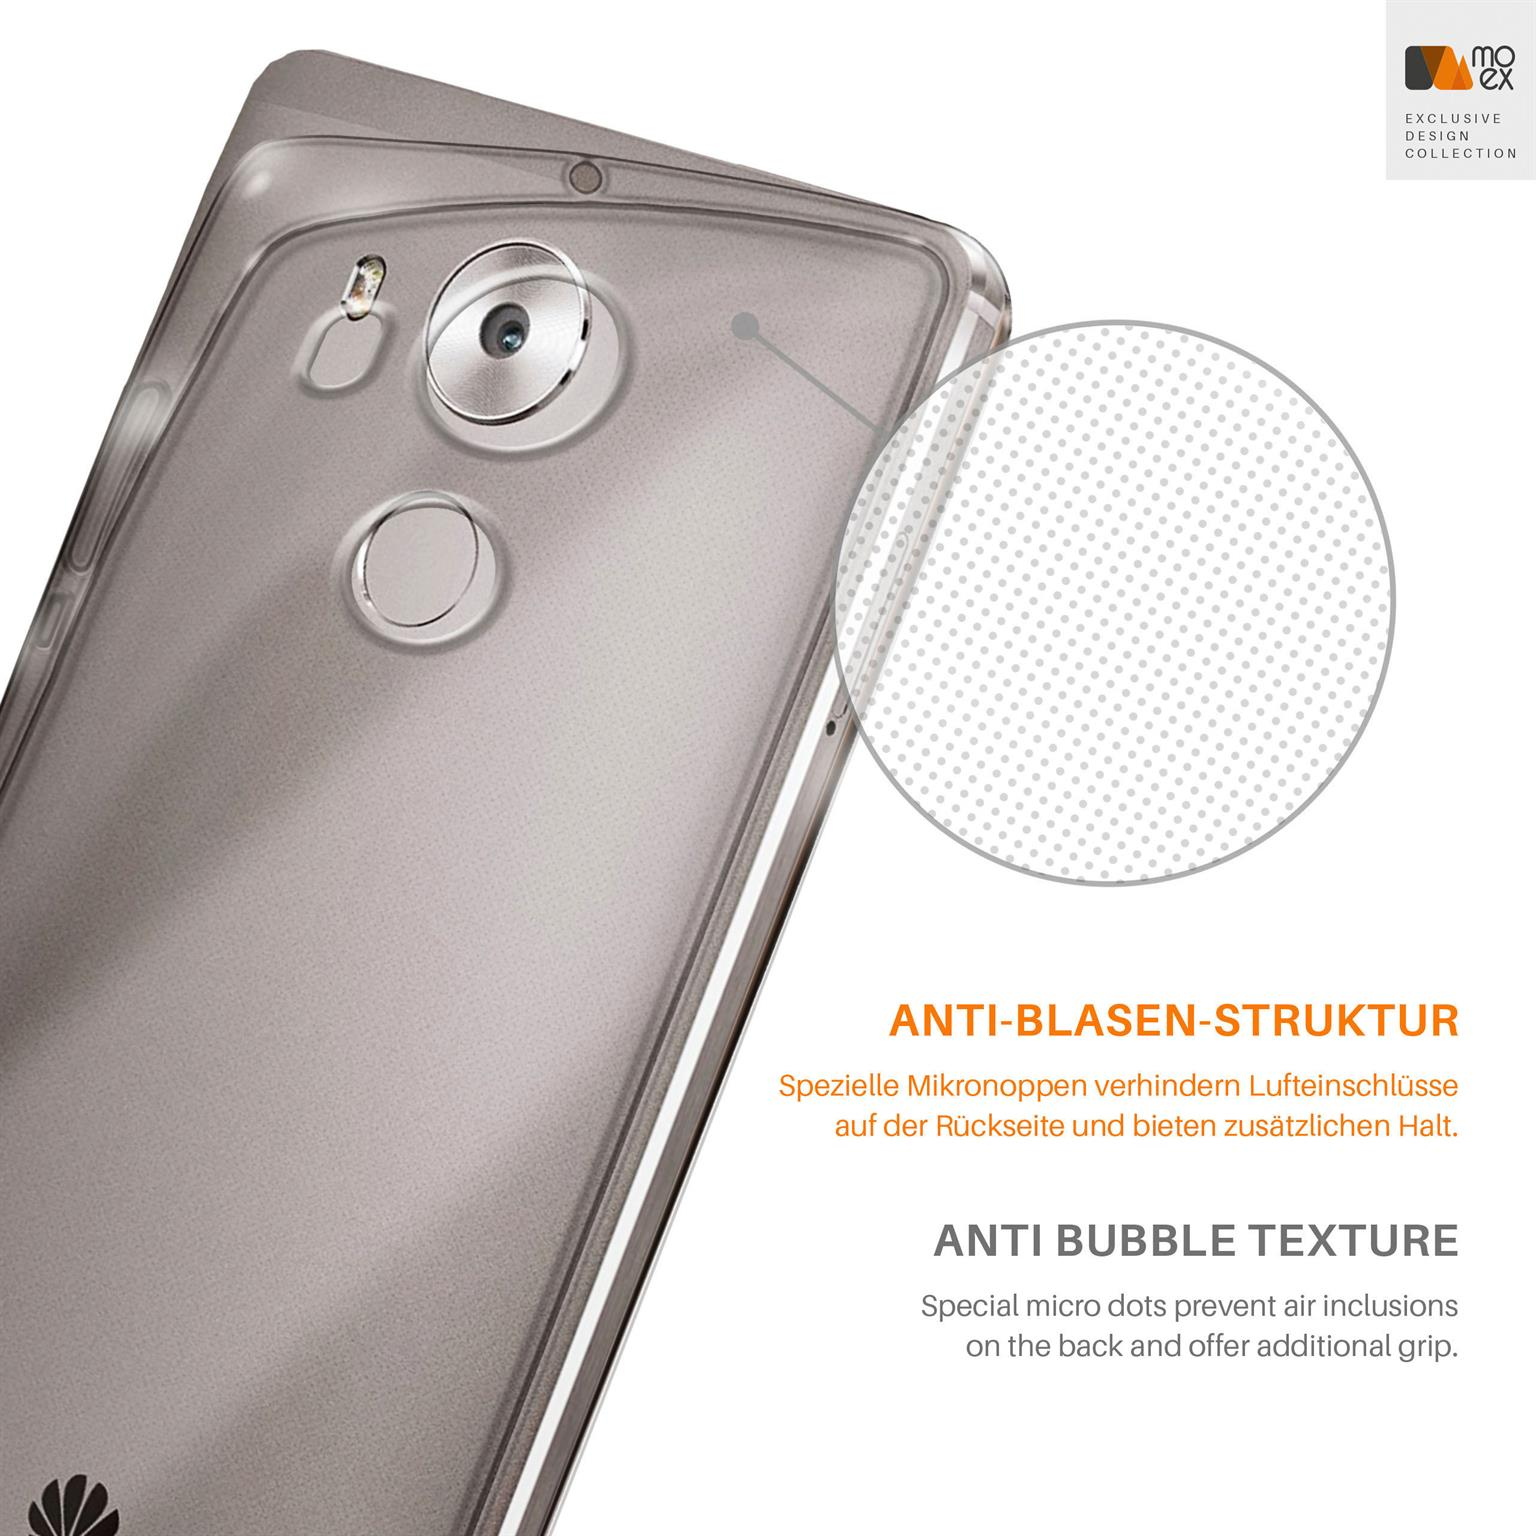 Mate 8, Aero Huawei, Backcover, MOEX Case, Crystal-Clear